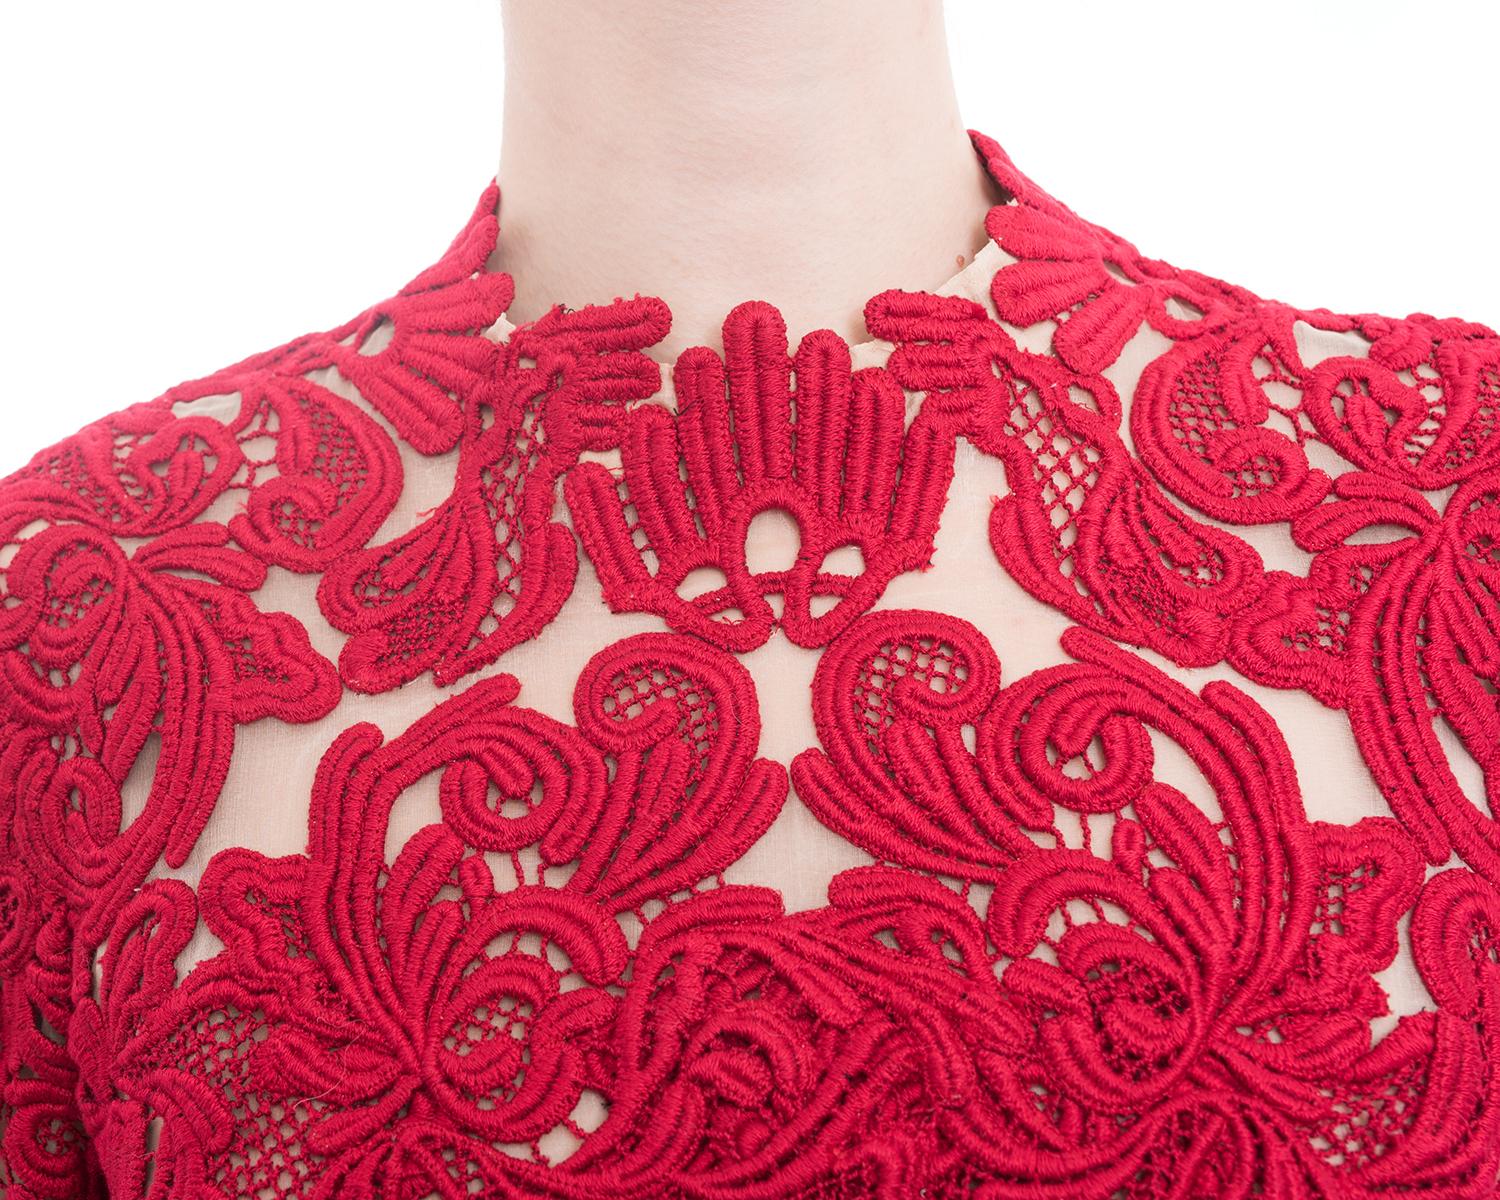 Erdem Fall 2015 Red Guipure Lace Long Sleeve Cocktail Dress - 2/4 3